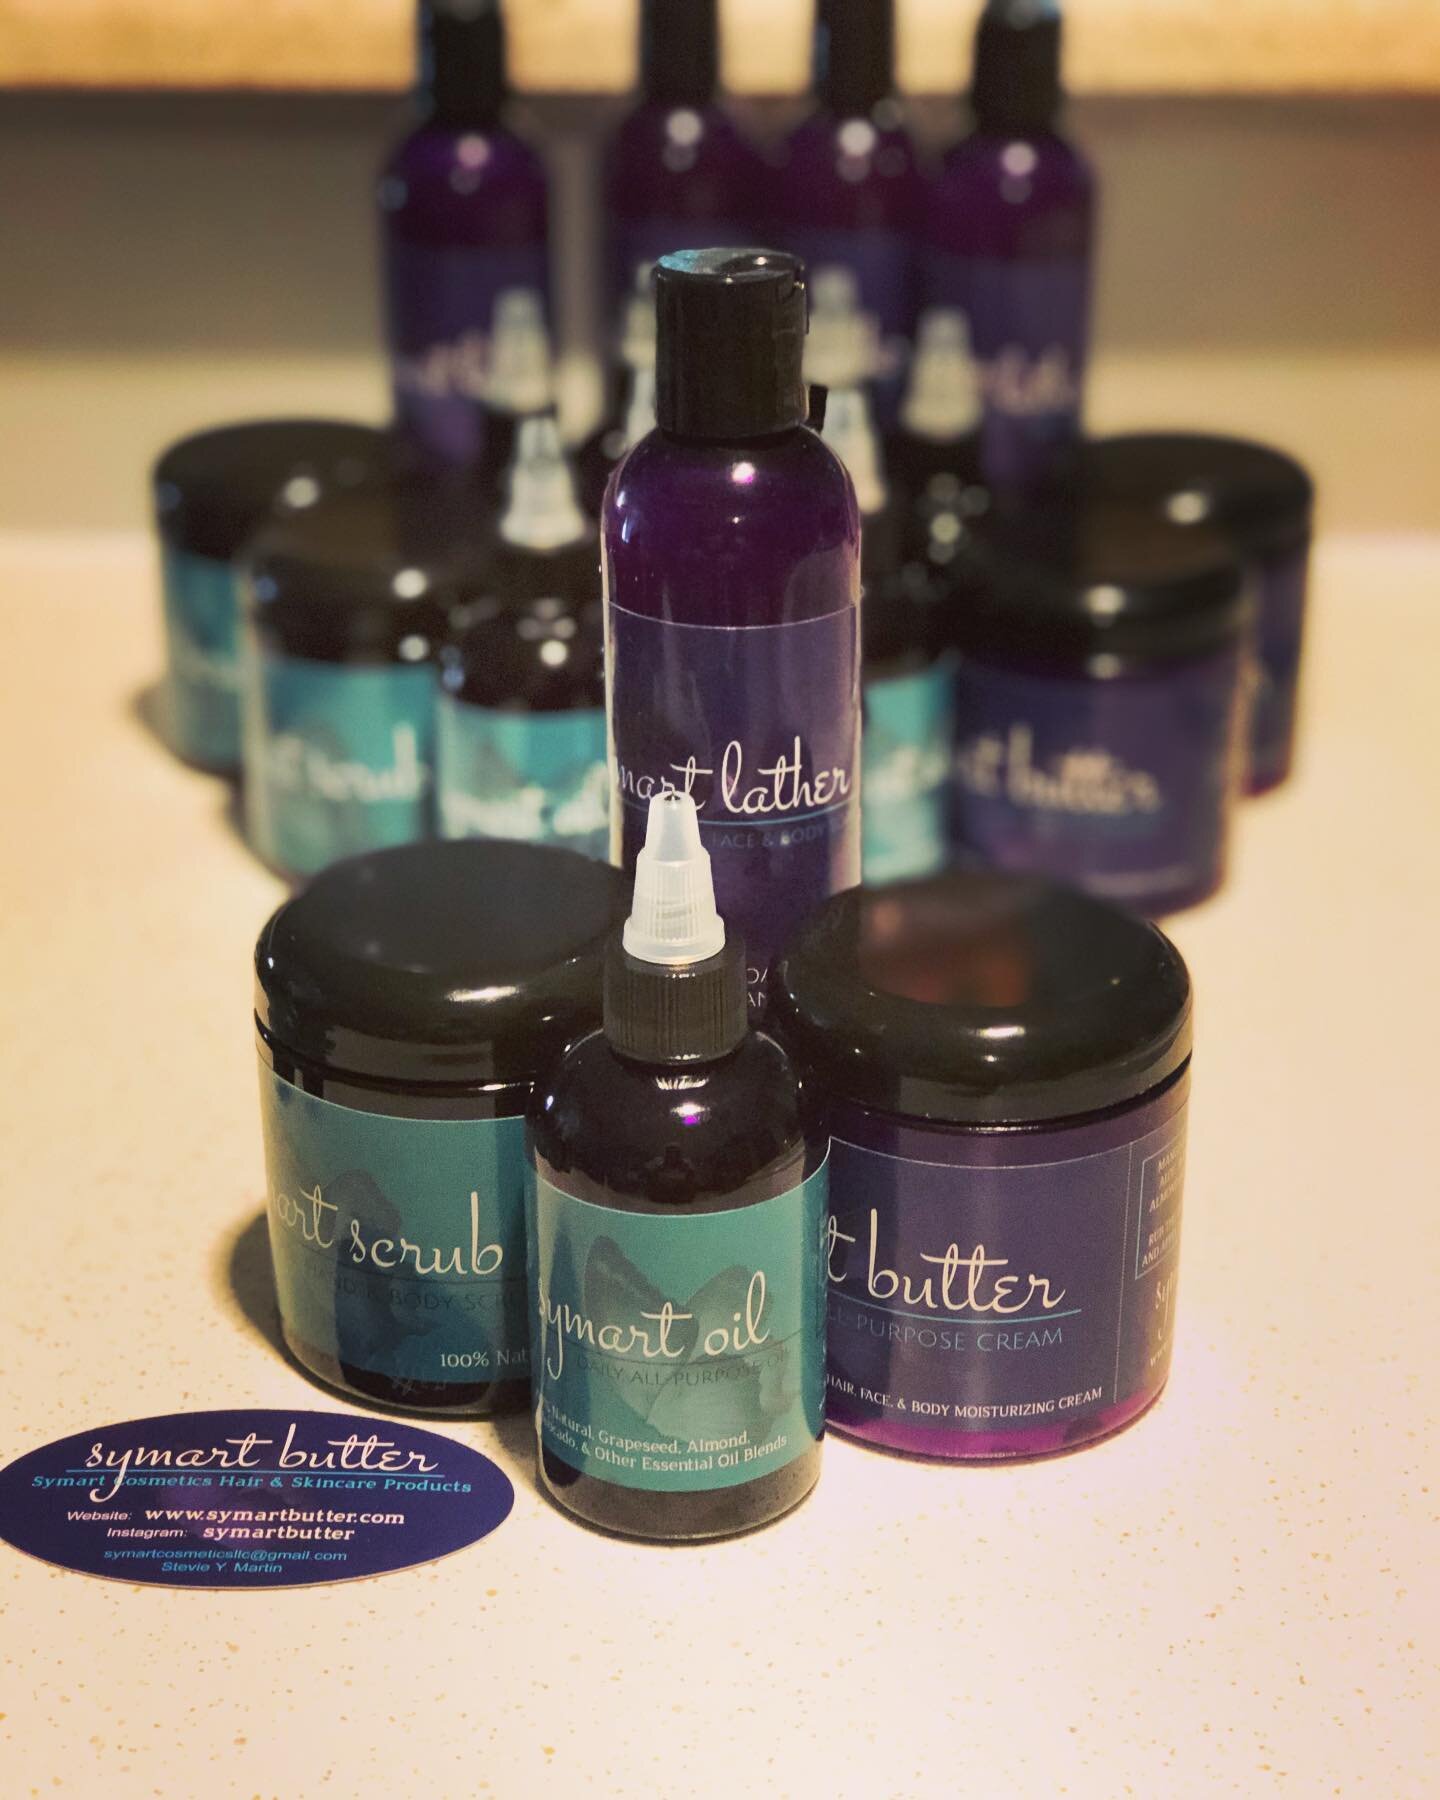 The #symartpack is everything you need from head to toe! #lather #butter #oil #scrub... All natural and made for all skin types!! #natural #skincare #naturalskincare #vegan #nongmo #crueltyfreebeauty #allpurpose...link in bio